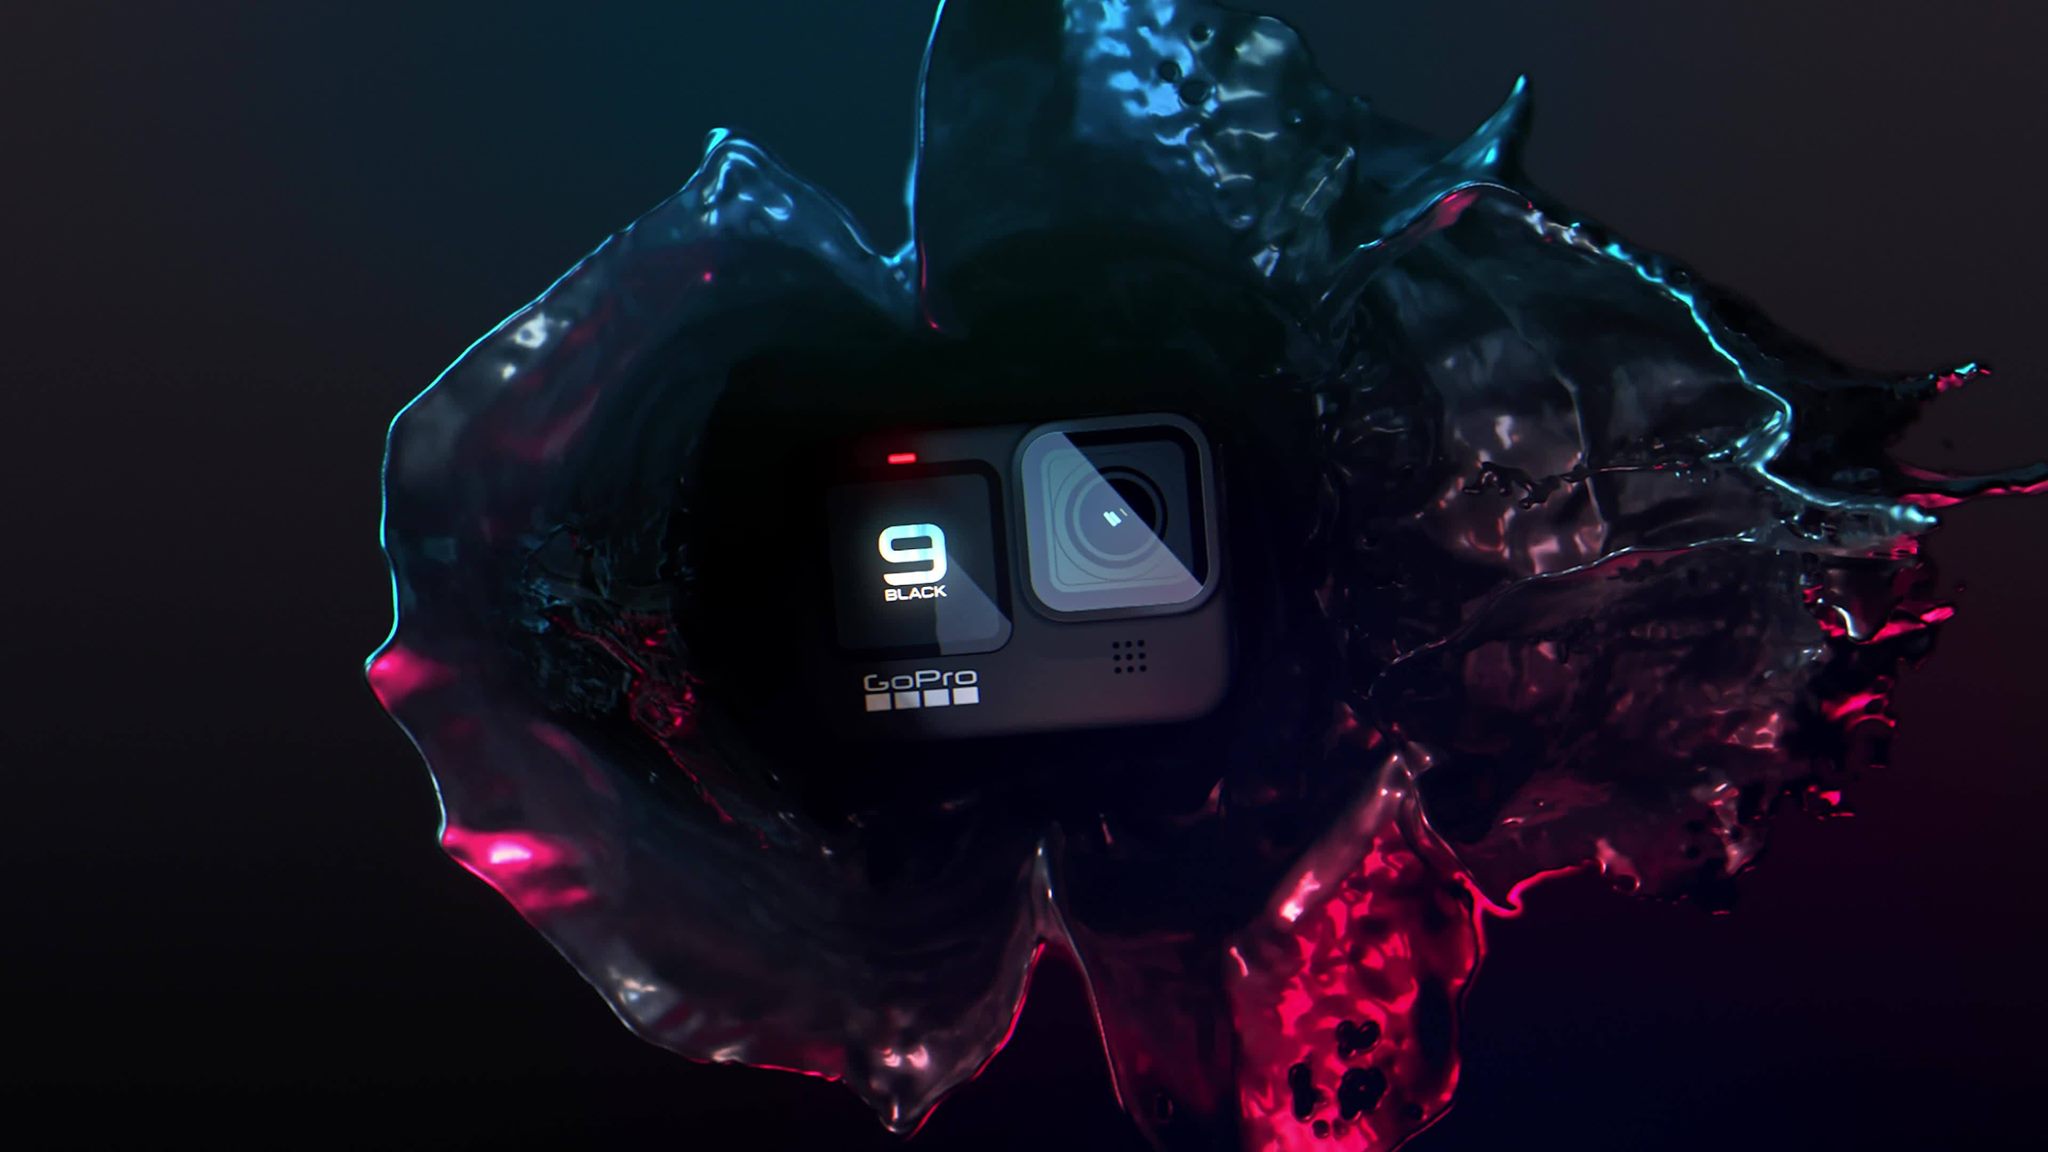 GoPro's Hero 9 Black arrives with a bigger battery and front